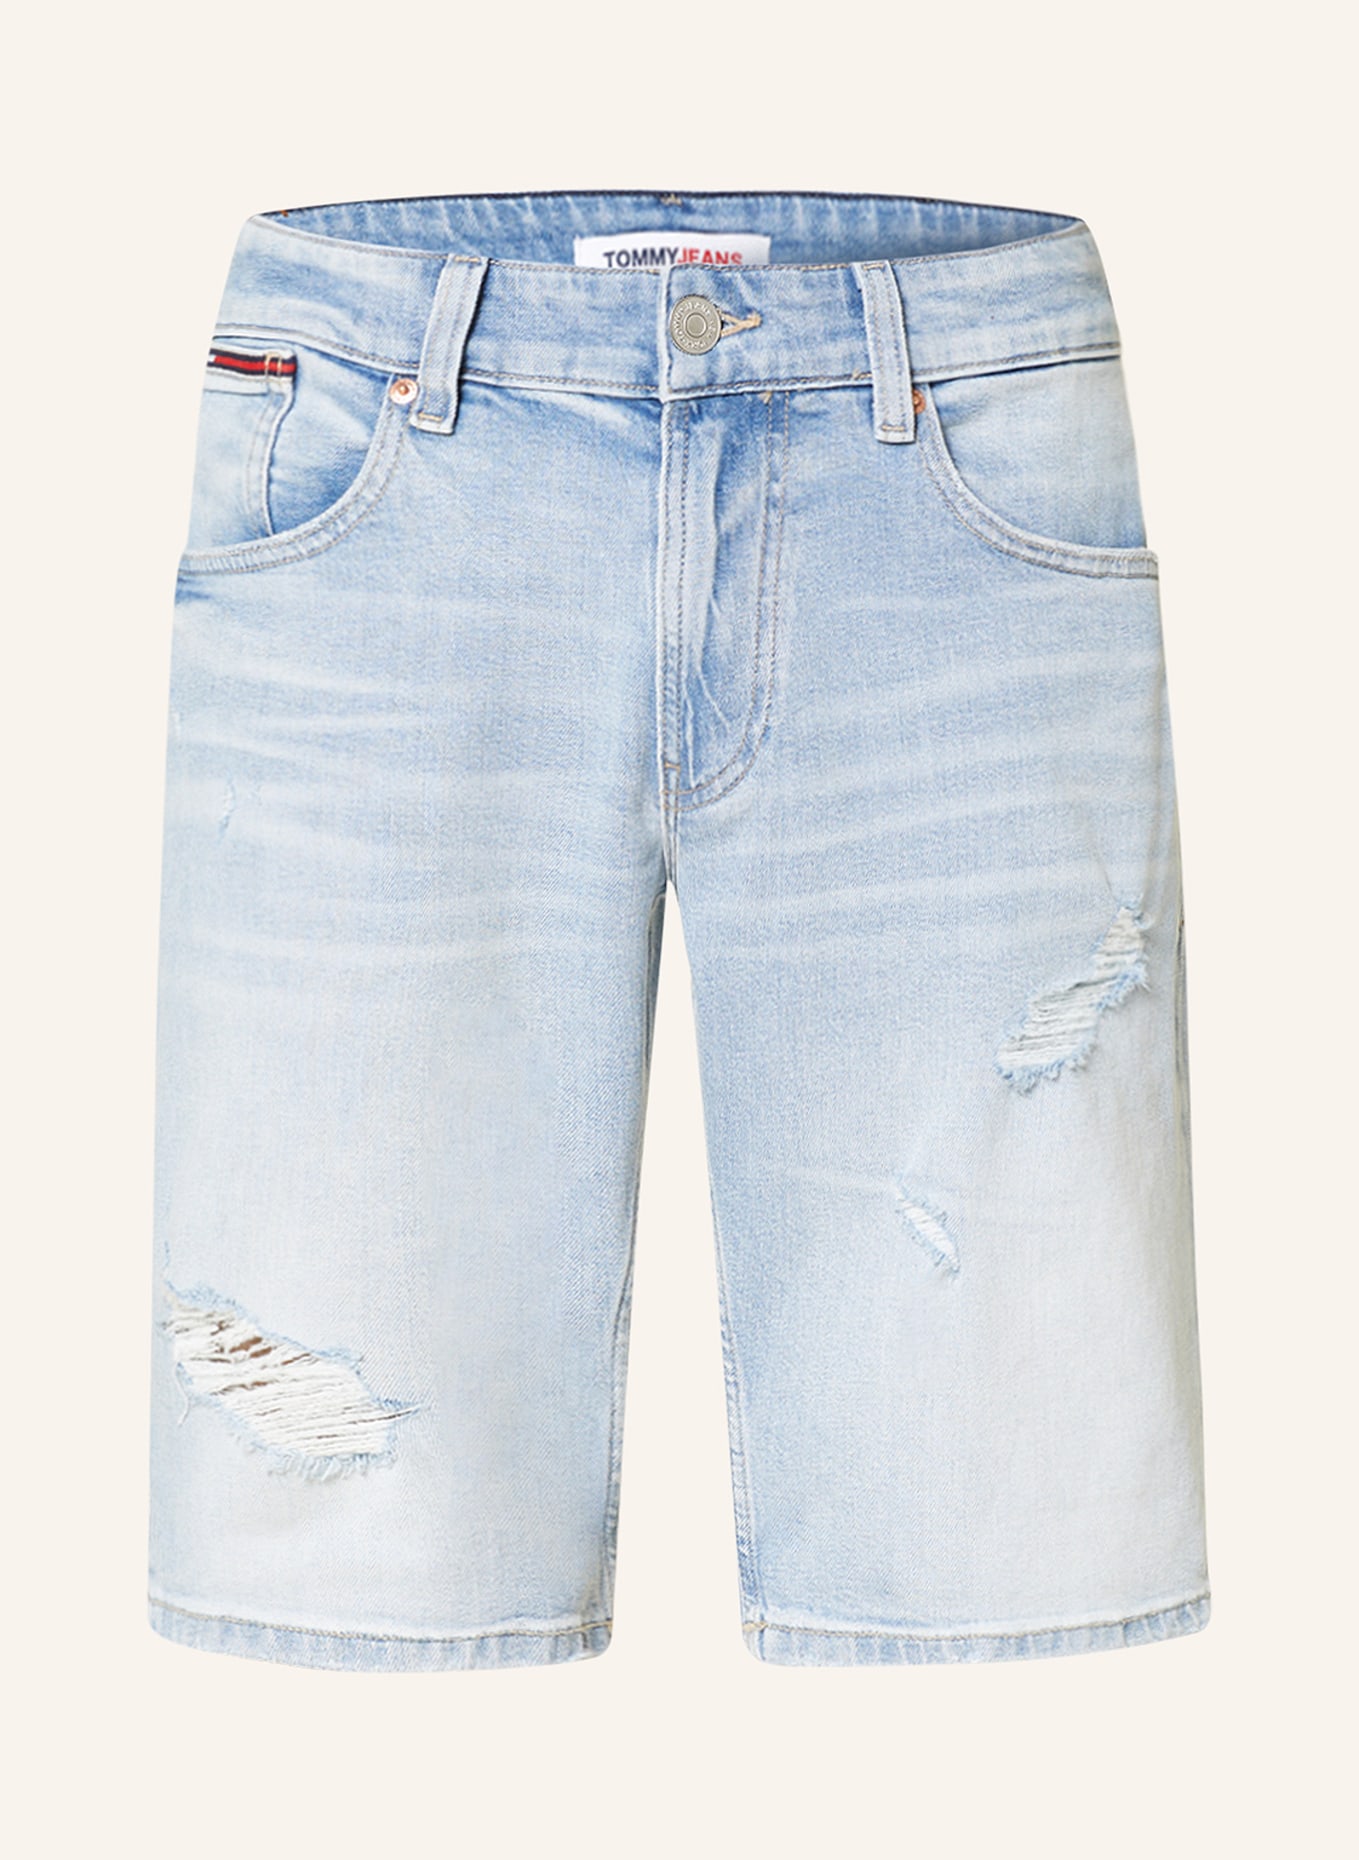 TOMMY JEANS Jeansshorts RONNIE Relaxed Fit, Farbe: 1AB Denim Light (Bild 1)